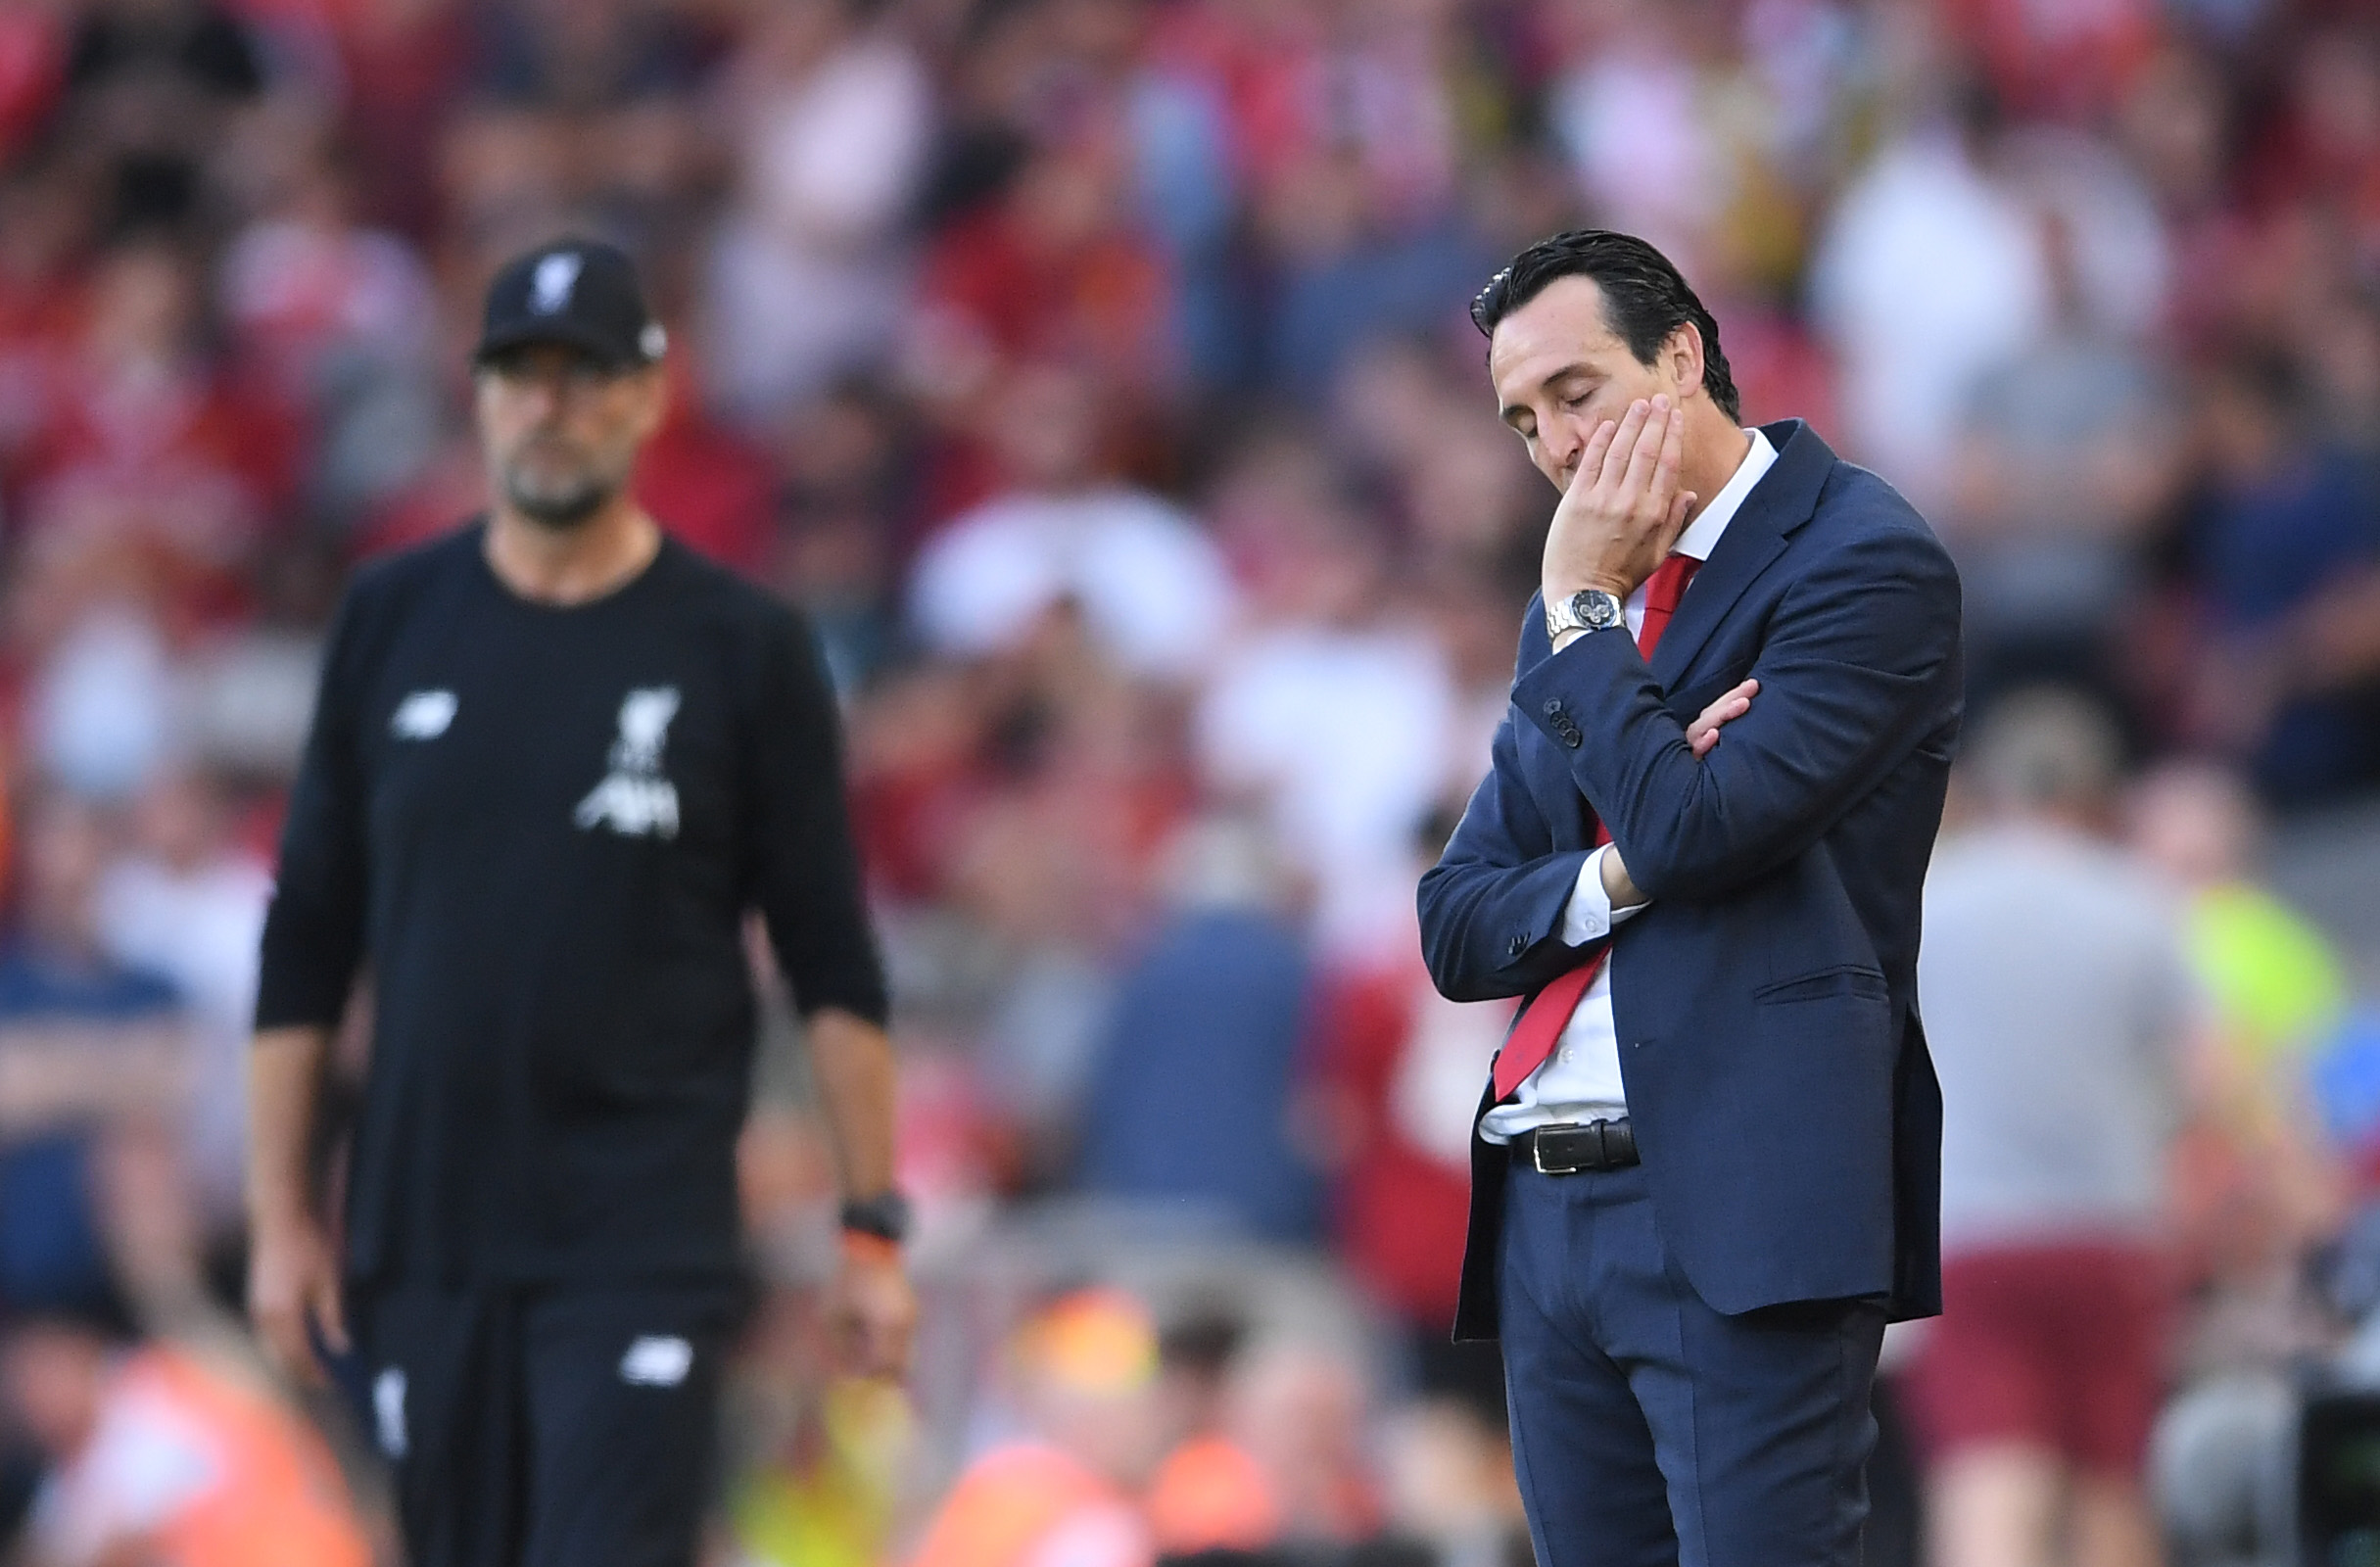 LIVERPOOL, ENGLAND - AUGUST 24: Unai Emery, Manager of Arsenal looks on in front of Jurgen Klopp of Liverpool during the Premier League match between Liverpool FC and Arsenal FC at Anfield on August 24, 2019 in Liverpool, United Kingdom. (Photo by Laurence Griffiths/Getty Images)